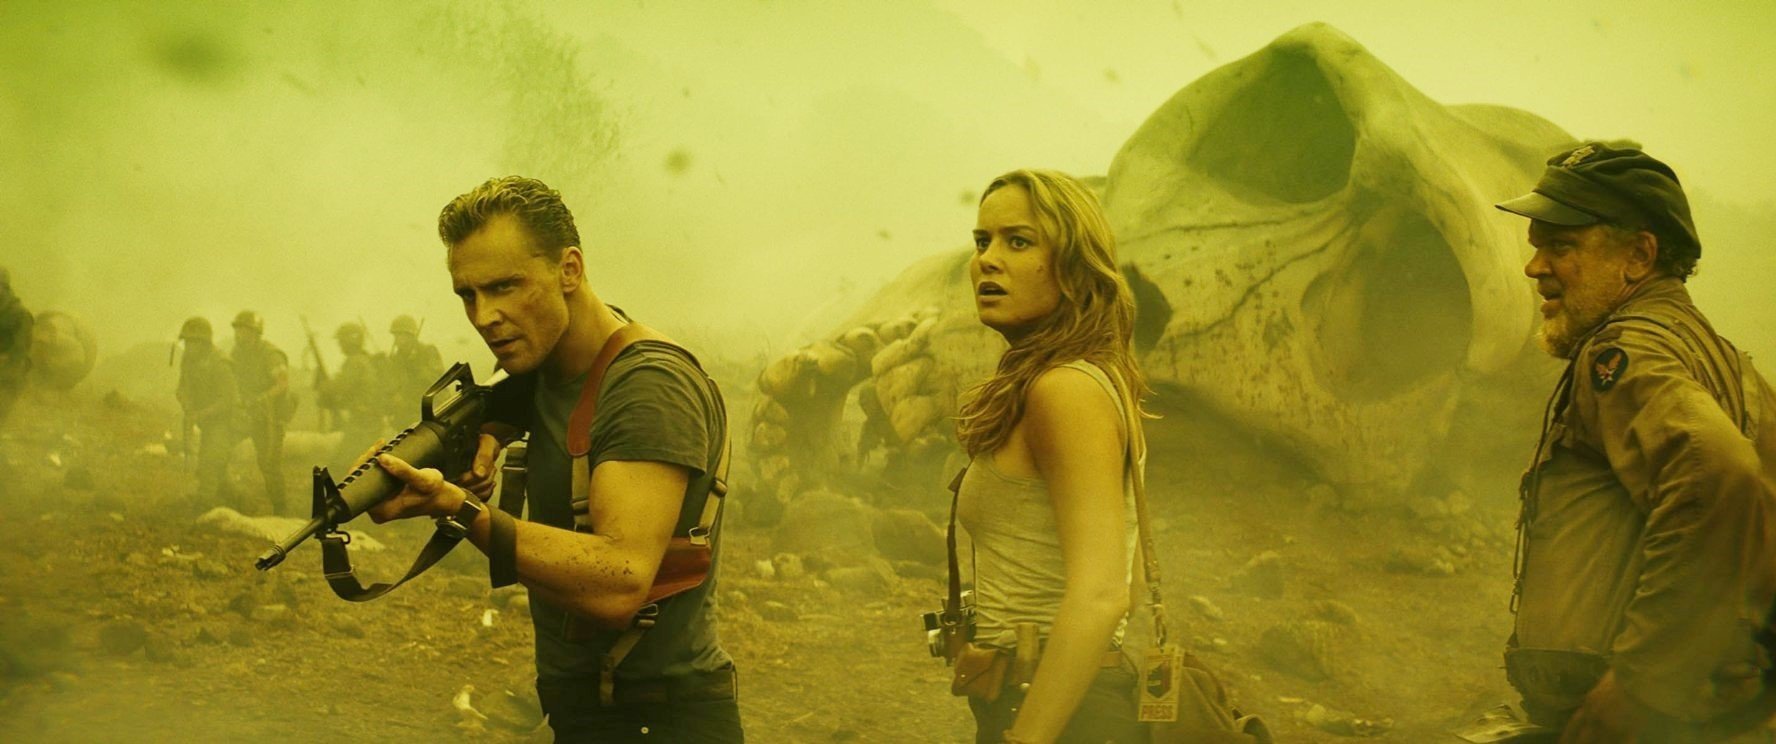 Tom Hiddleston, Brie Larson and John C. Reilly in Warner Bros. Pictures' Kong: Skull Island (2017)